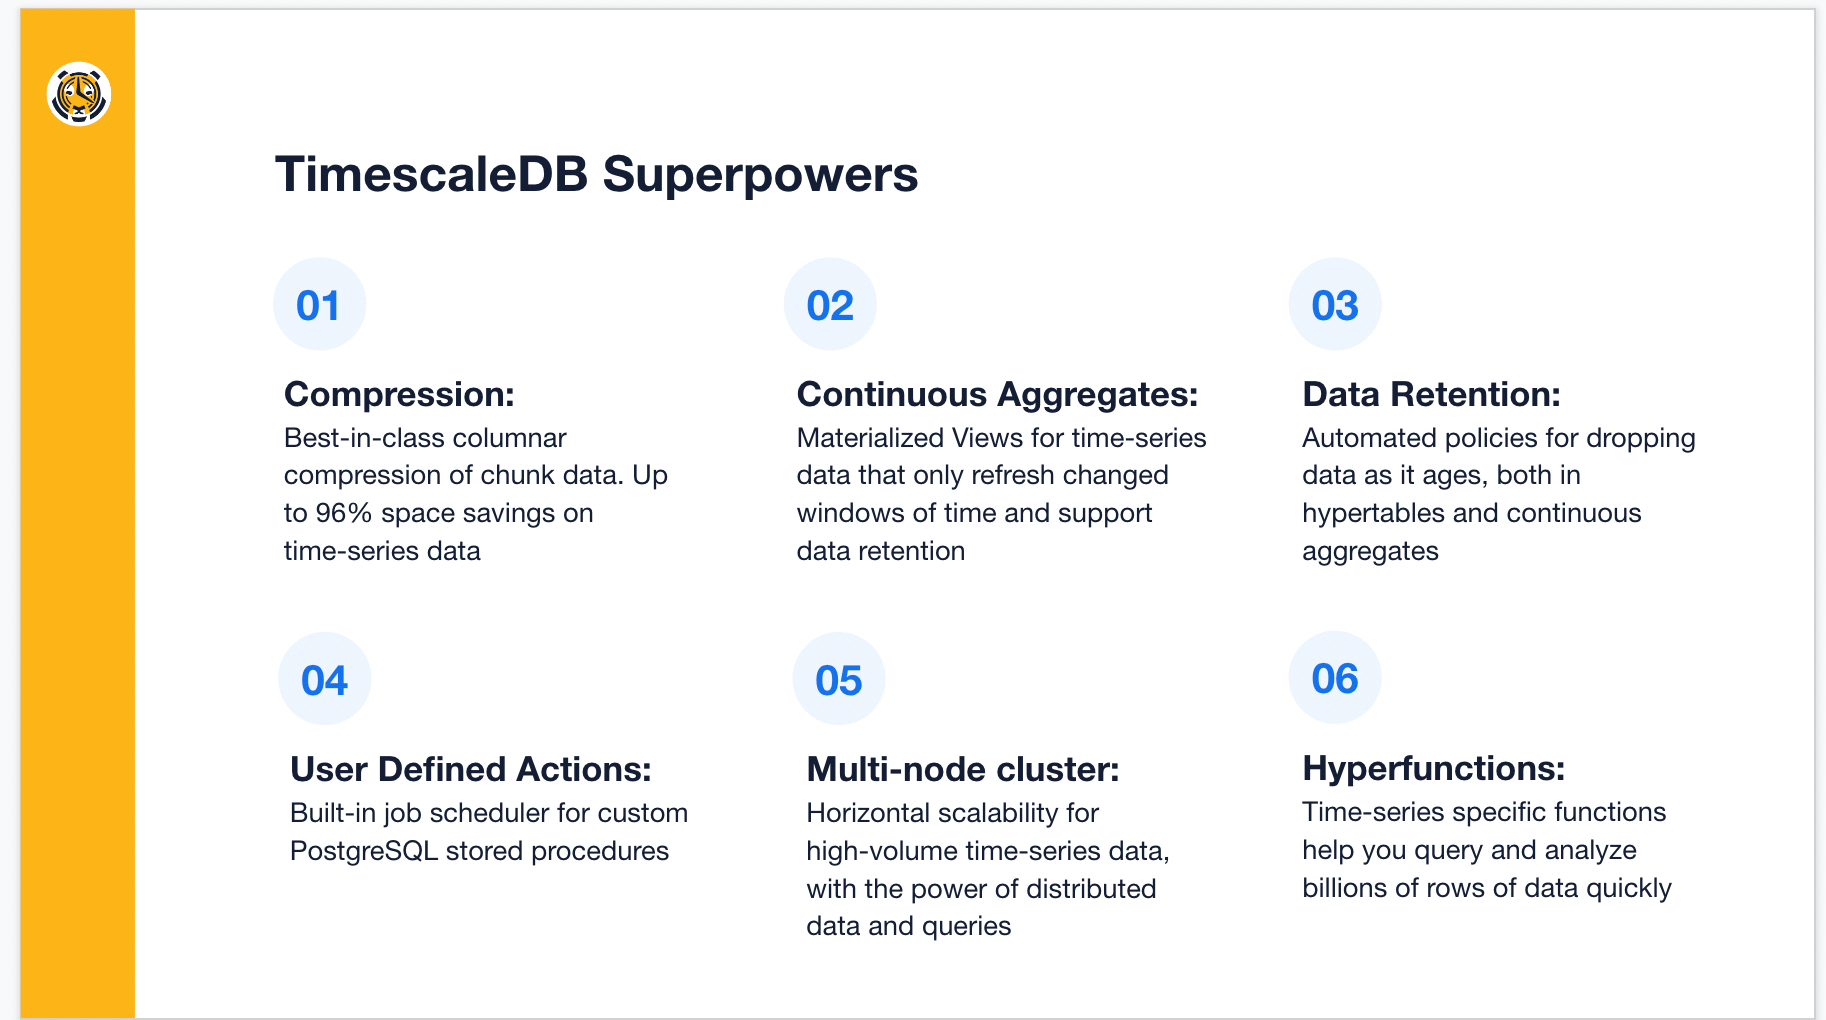 One of the slides of the talk describing TimescaleDB's superpowers